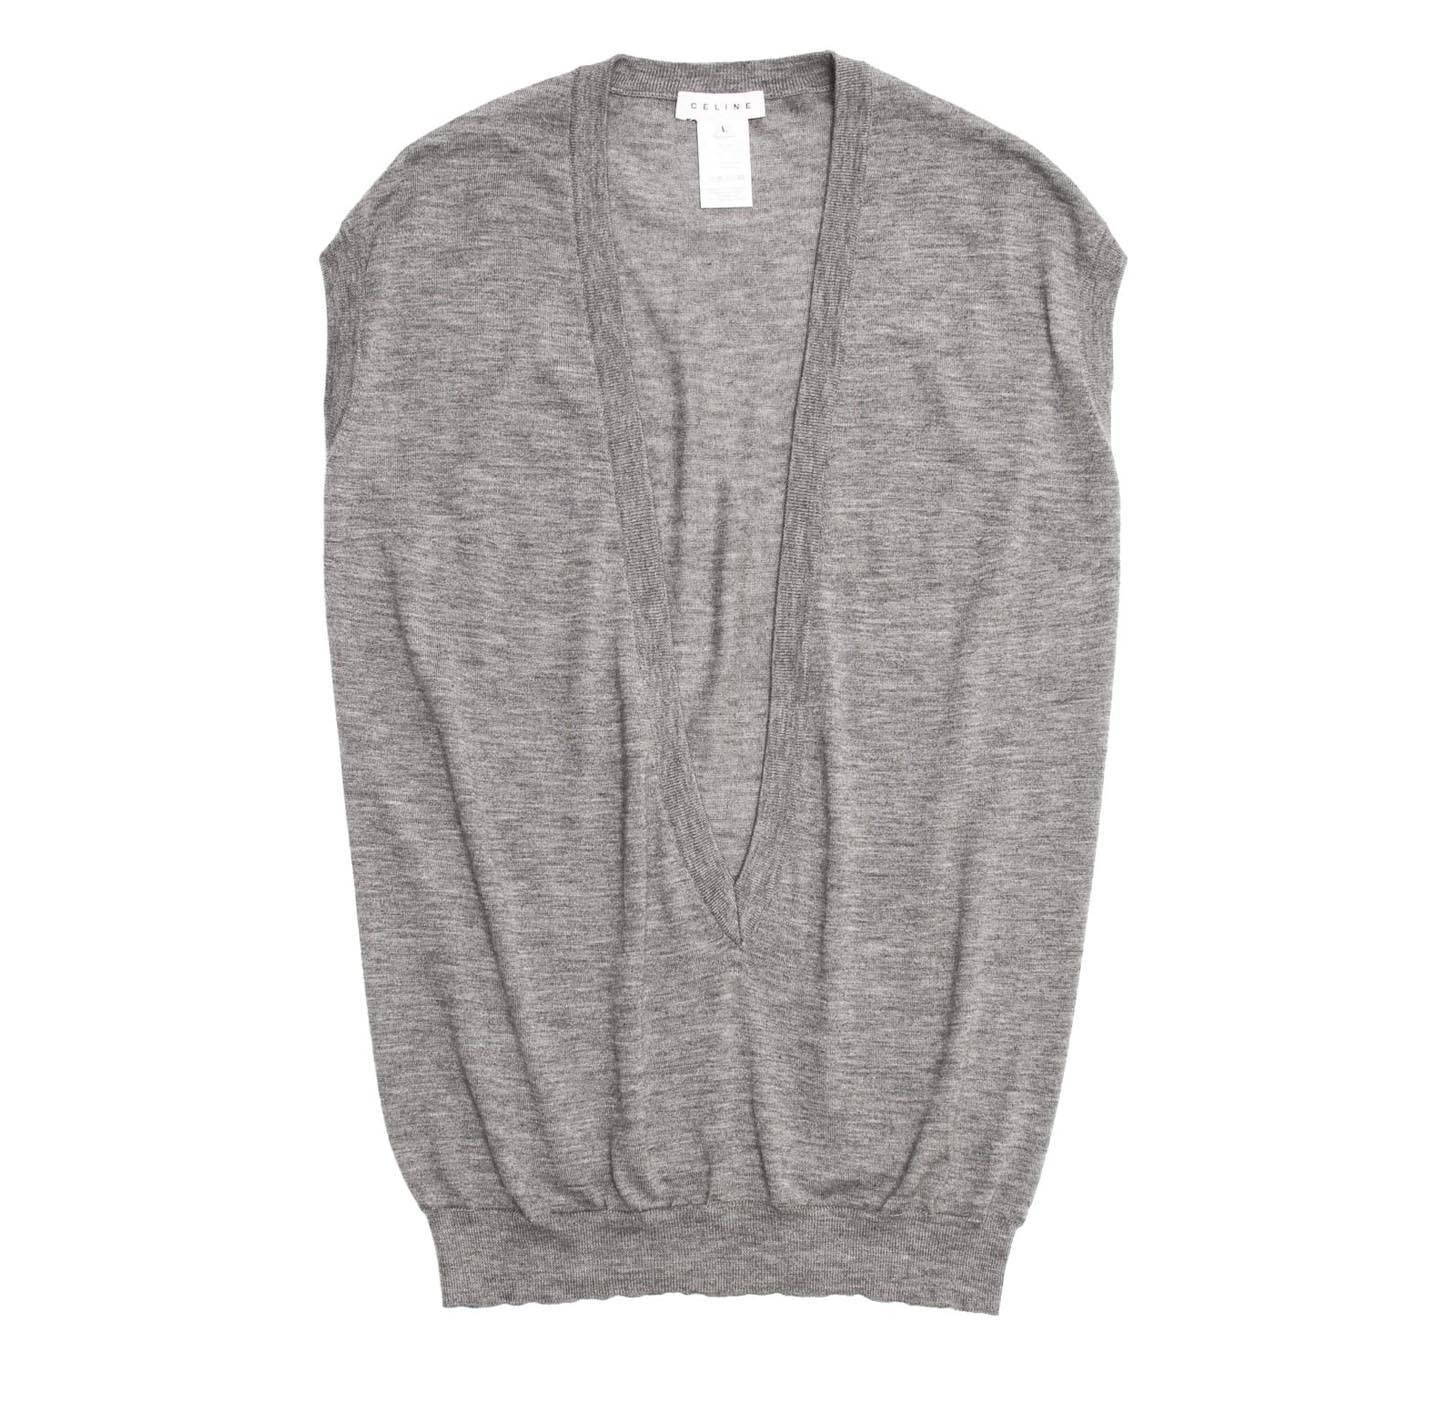 Grey cashmere long pullover vest with deep plunging V-neck opening. Made in Italy.

Size  L Universal sizing

Condition  Excellent: worn a few times